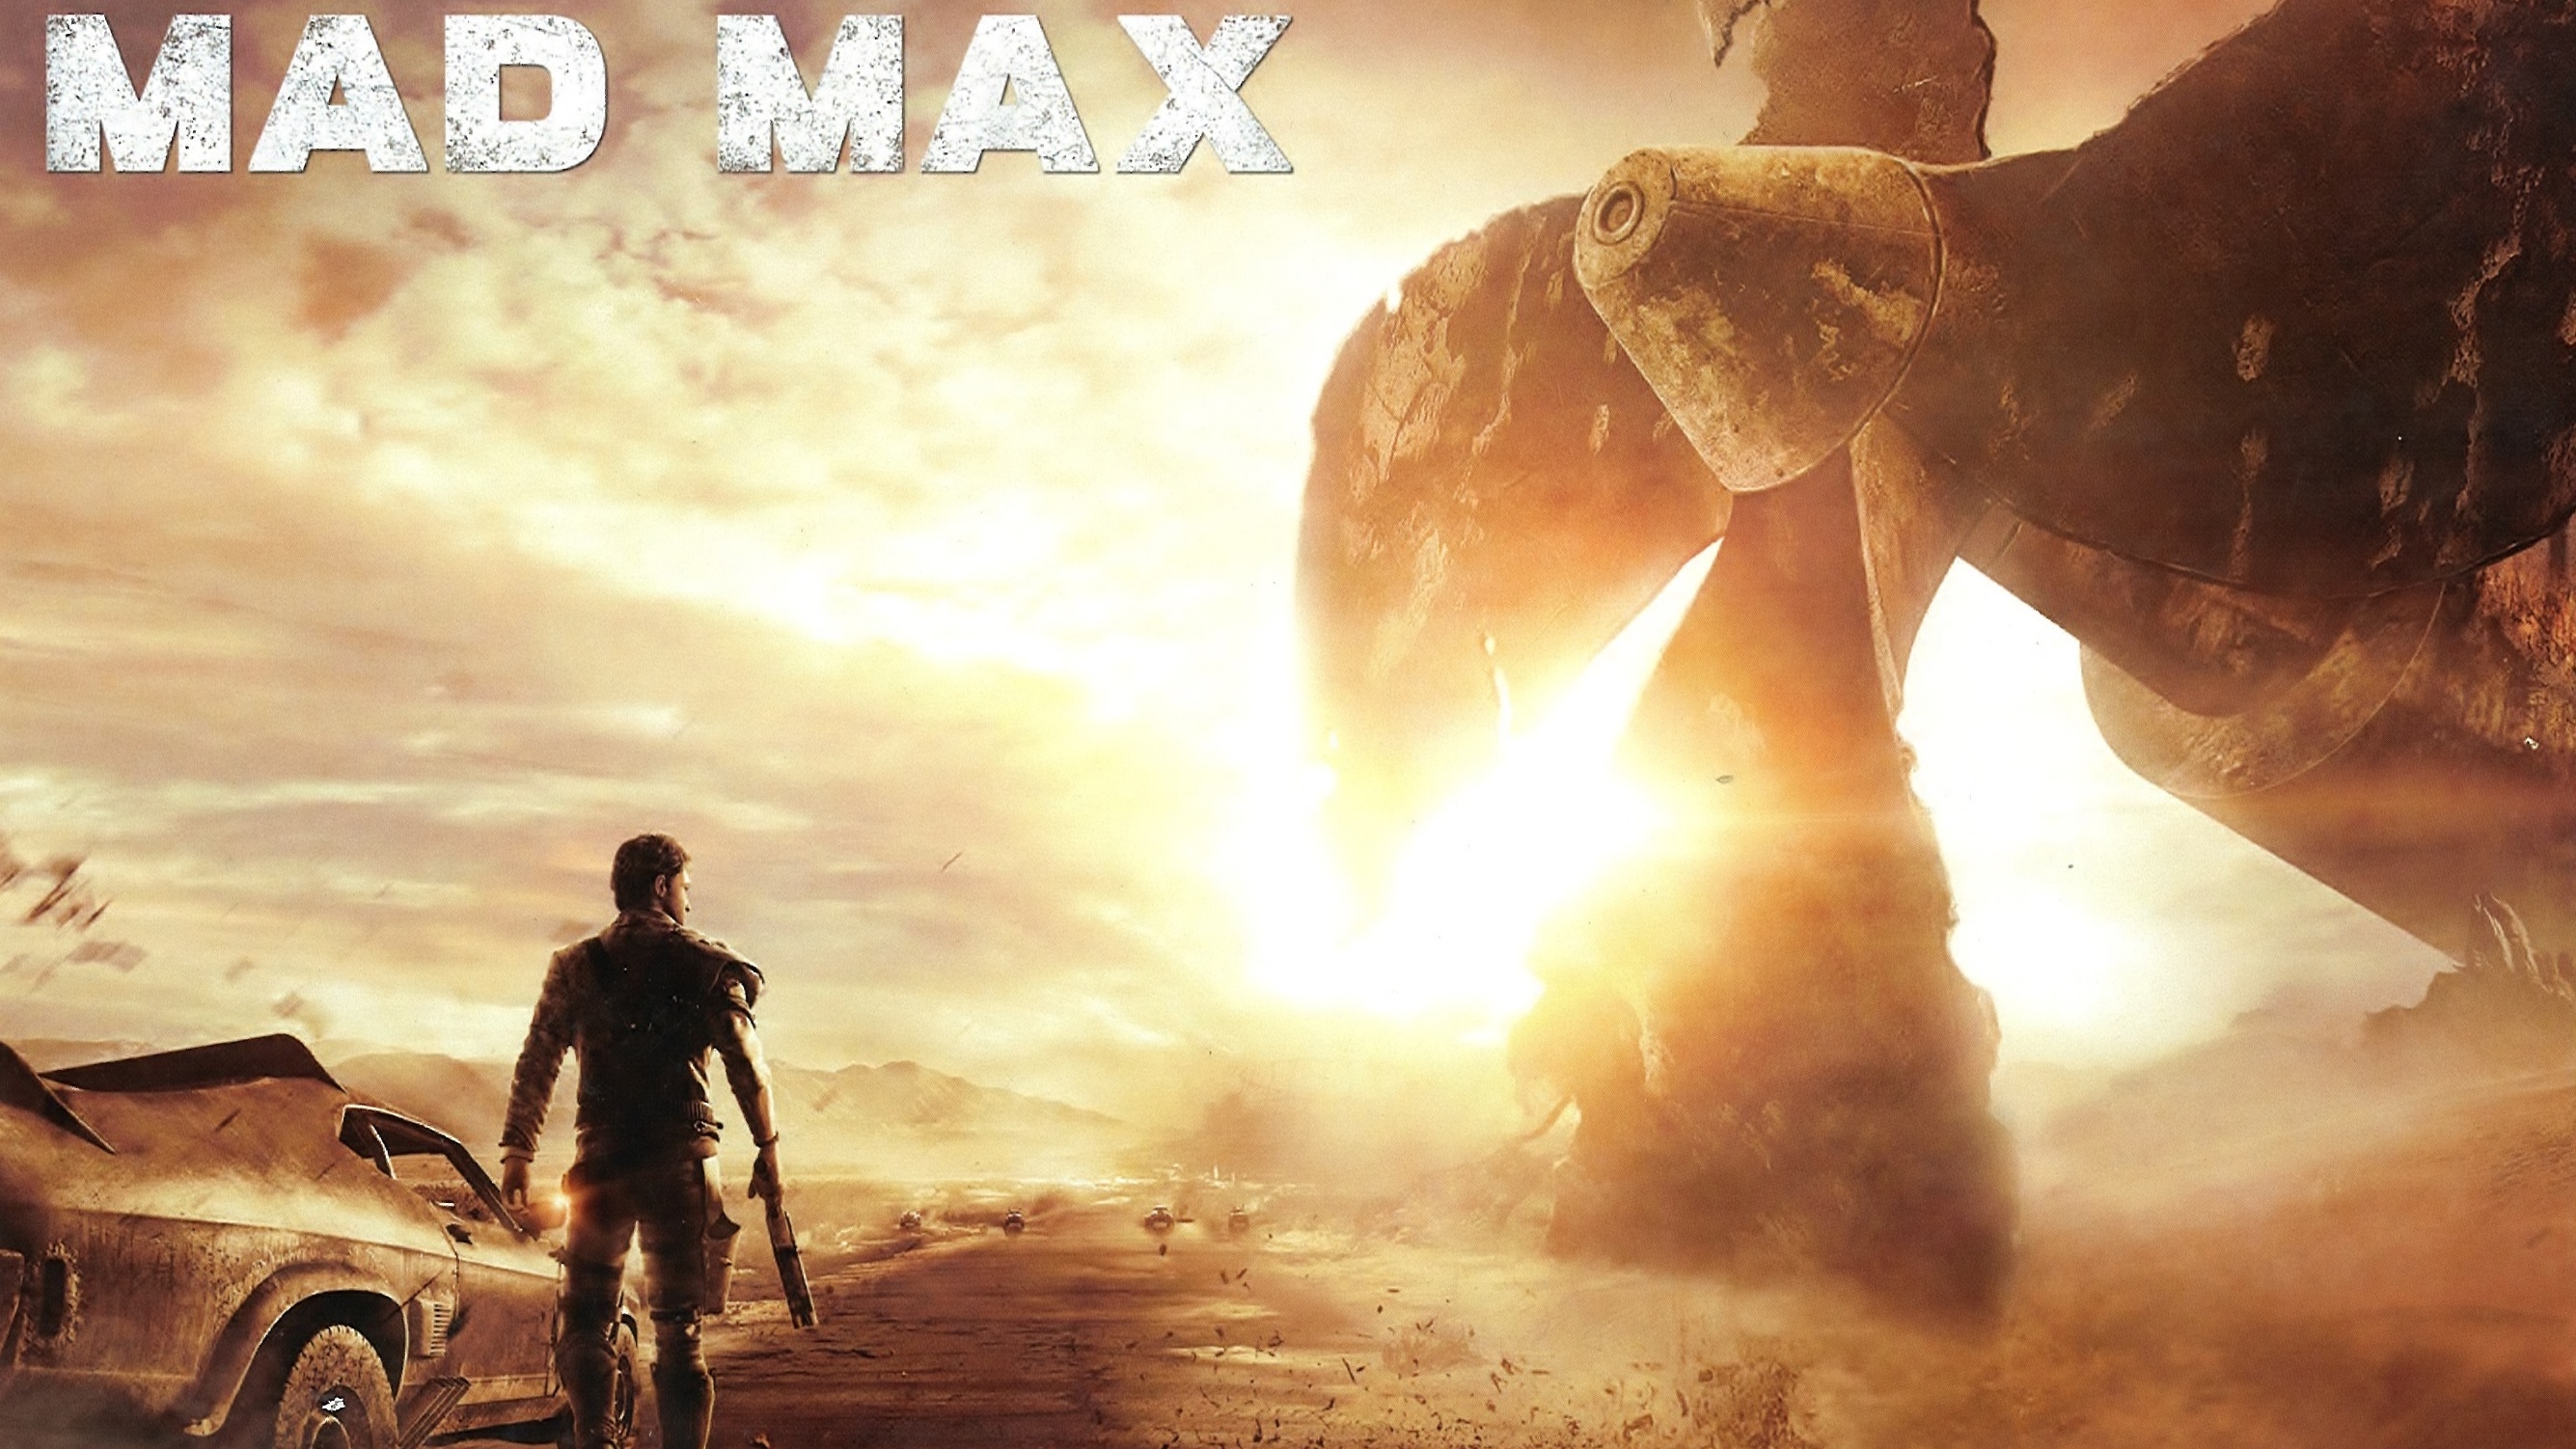 mad max game wallpaper,action adventure game,adventure game,movie,pc game,landscape